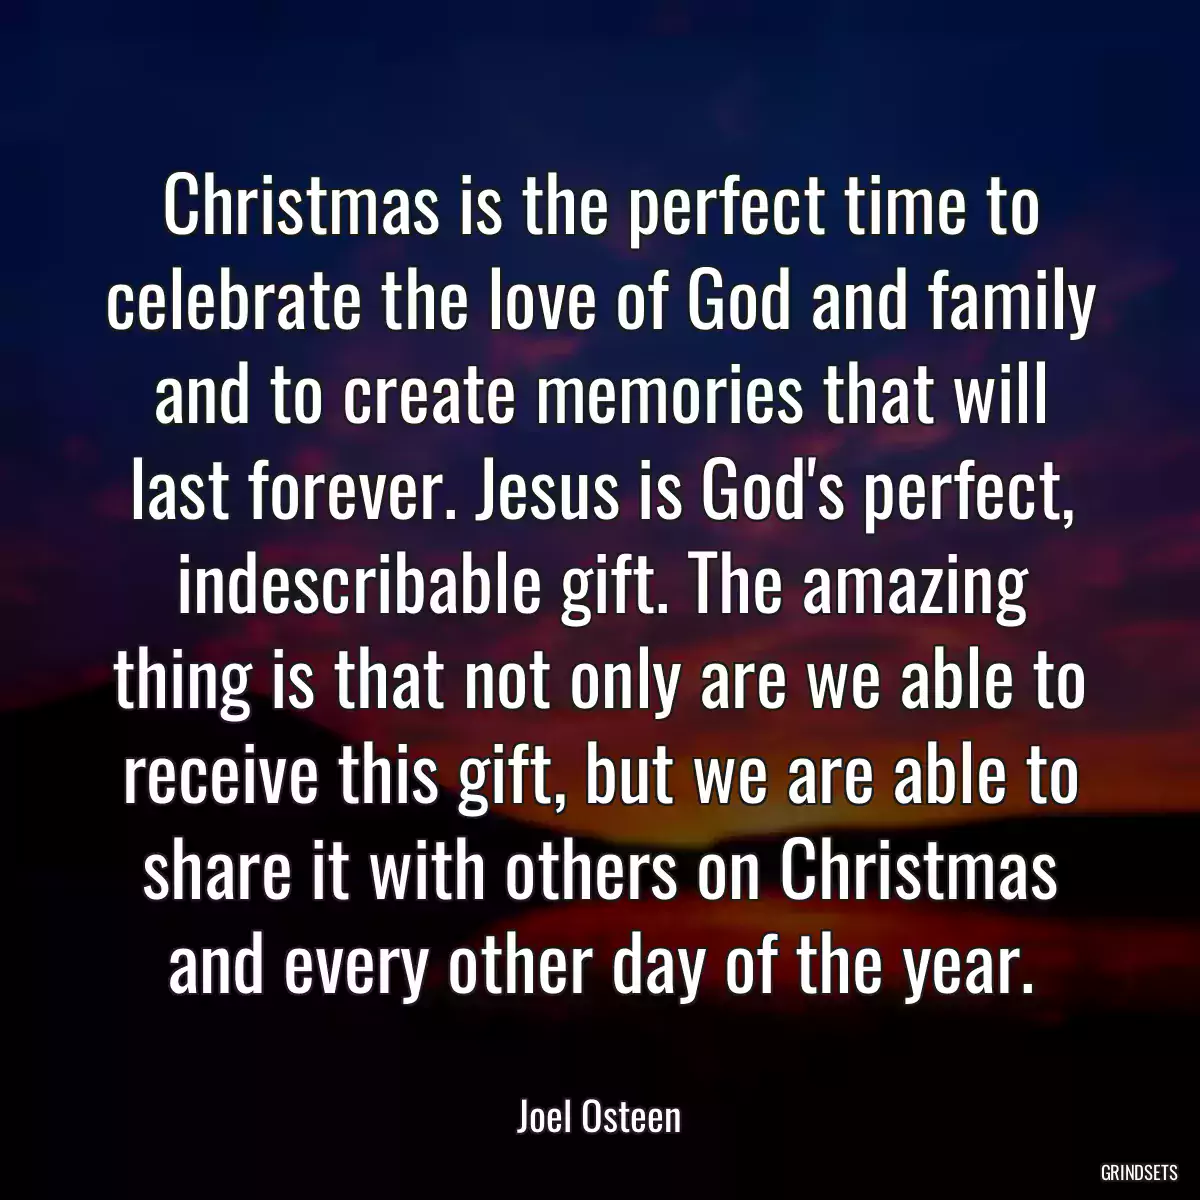 Christmas is the perfect time to celebrate the love of God and family and to create memories that will last forever. Jesus is God\'s perfect, indescribable gift. The amazing thing is that not only are we able to receive this gift, but we are able to share it with others on Christmas and every other day of the year.